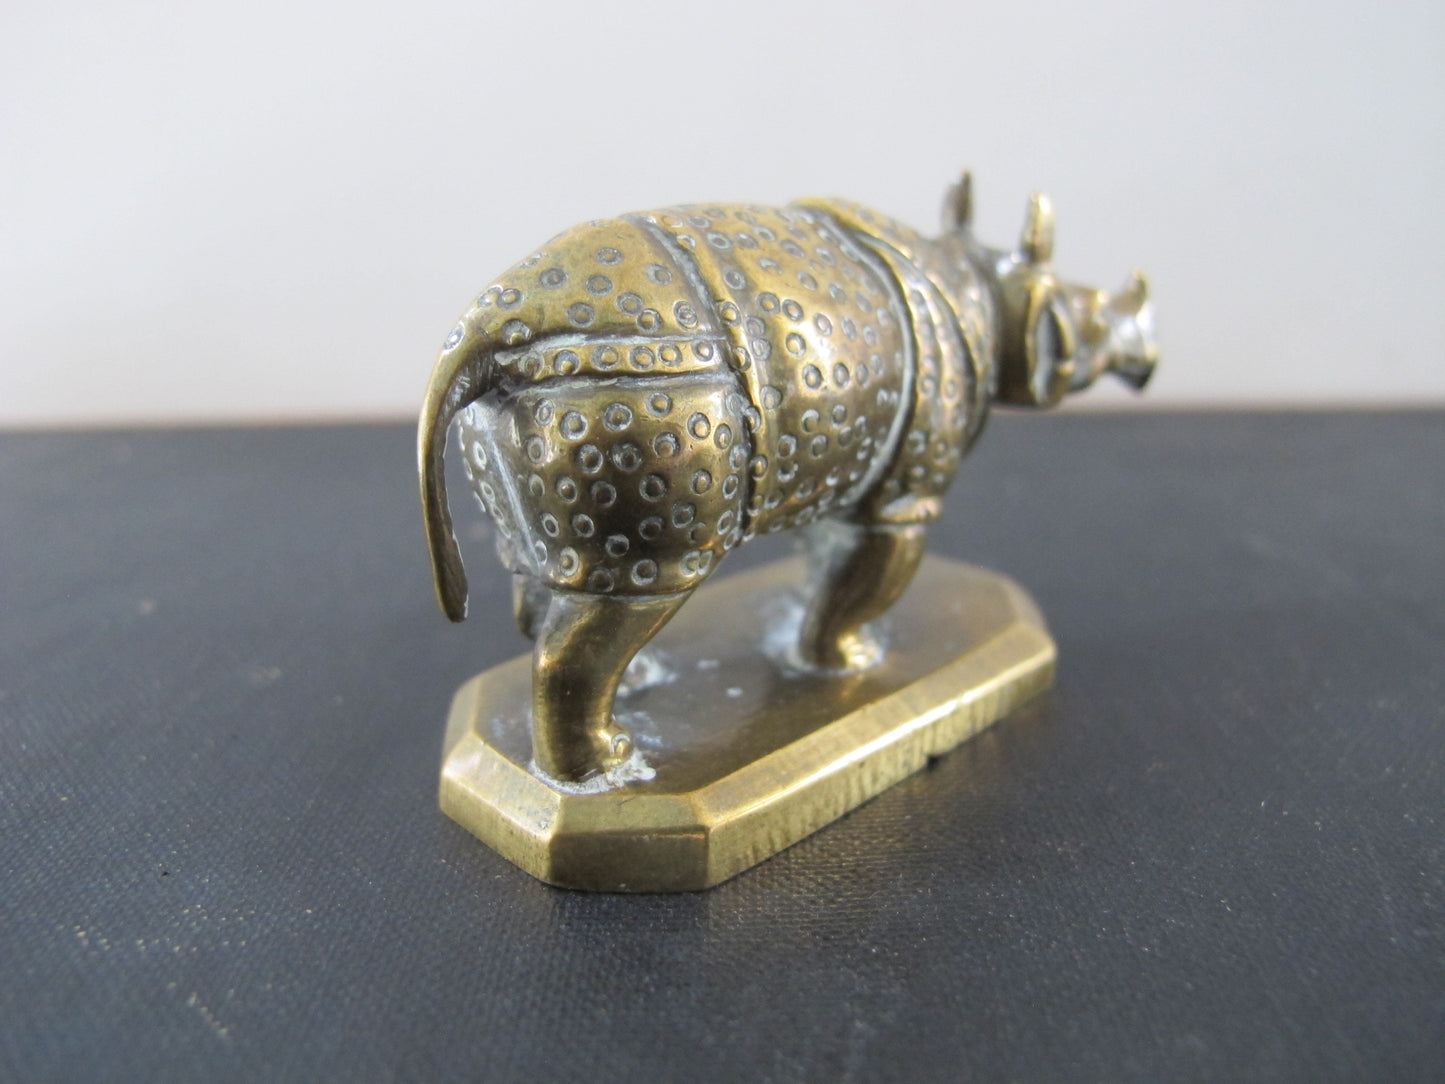 Anglo-Indian Miniature Sculpture Rhino Rhinocerus 19th Century 1860s 1870s Marked